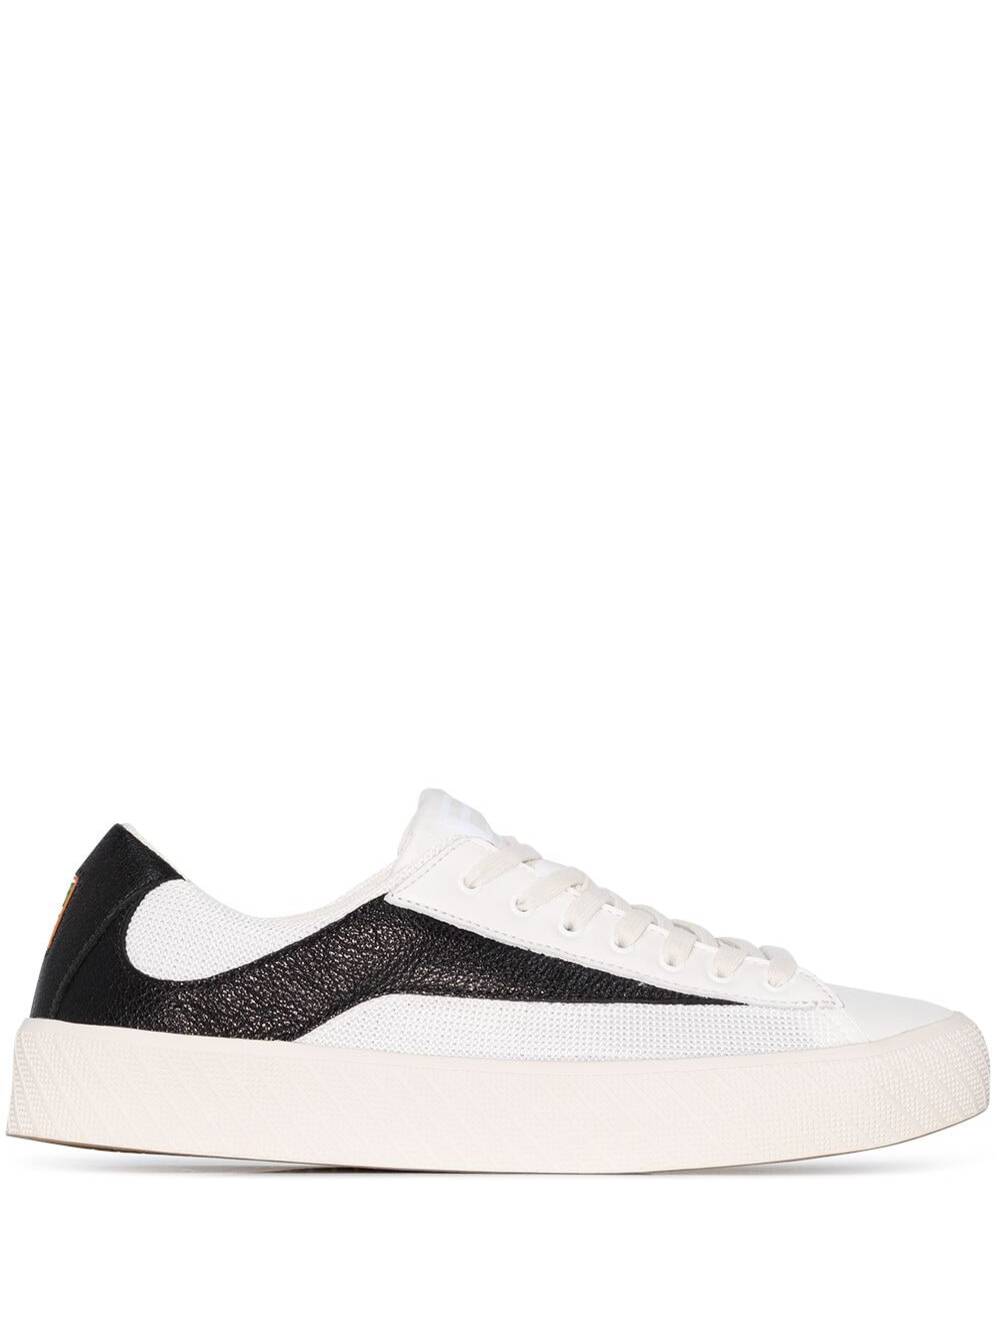 BY FAR Rodina Leather And Fabric Sneakers